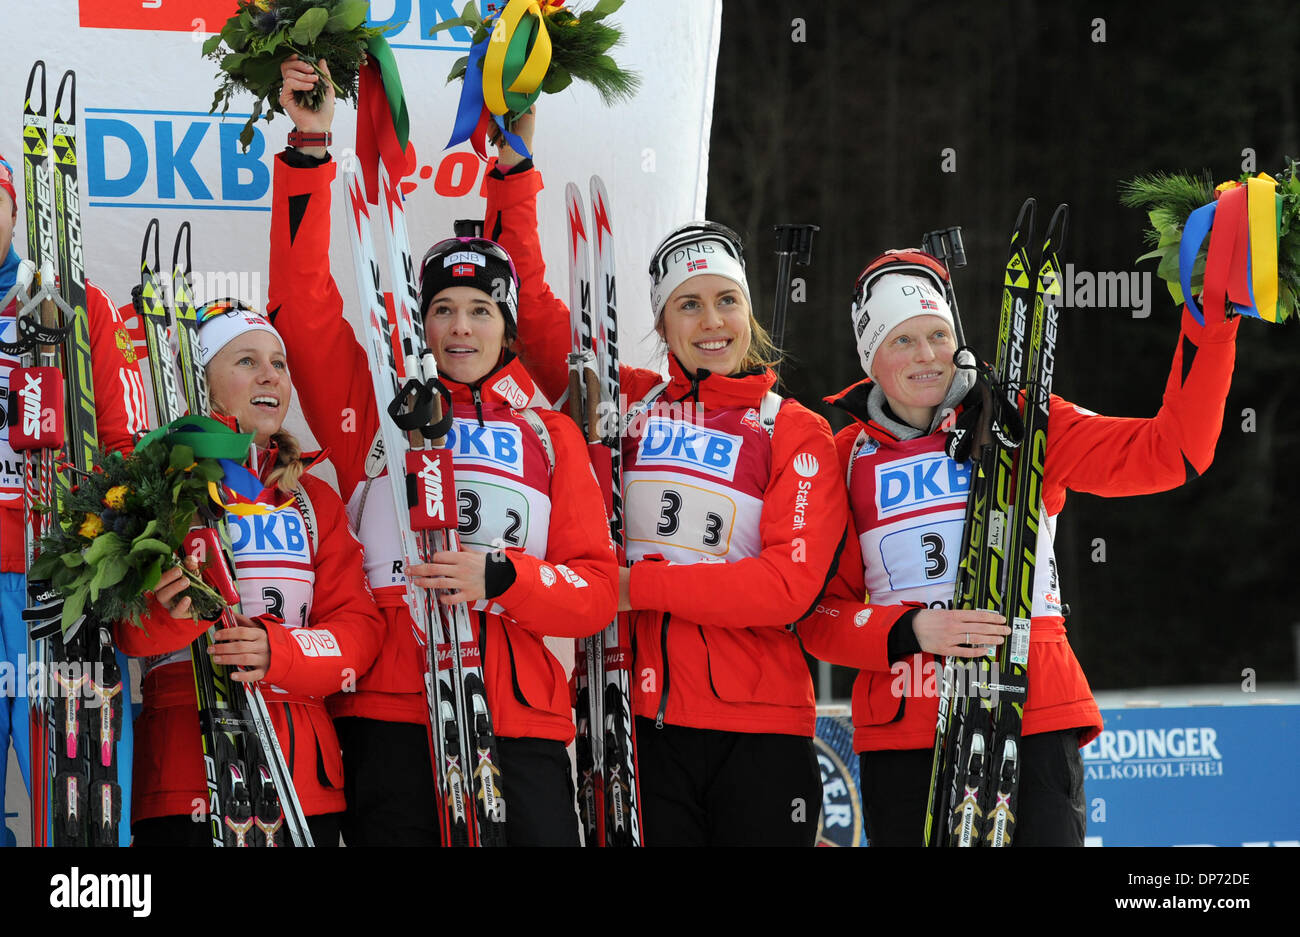 Ruhpolding, Germany. 08th Jan, 2014. Norway's Tiril Eckhoff (L-R), Ann Kristin Aafedt Flatland, Synnoeve Solemdal and Tora Bergerhold celebrate after taking the third place at the Women's 4x6 km relay competition during the Biathlon World Cup at the Chiemgau Arena in Ruhpolding, Germany, 08 January 2014. Photo: TOBIAS HASE/dpa/Alamy Live News Stock Photo